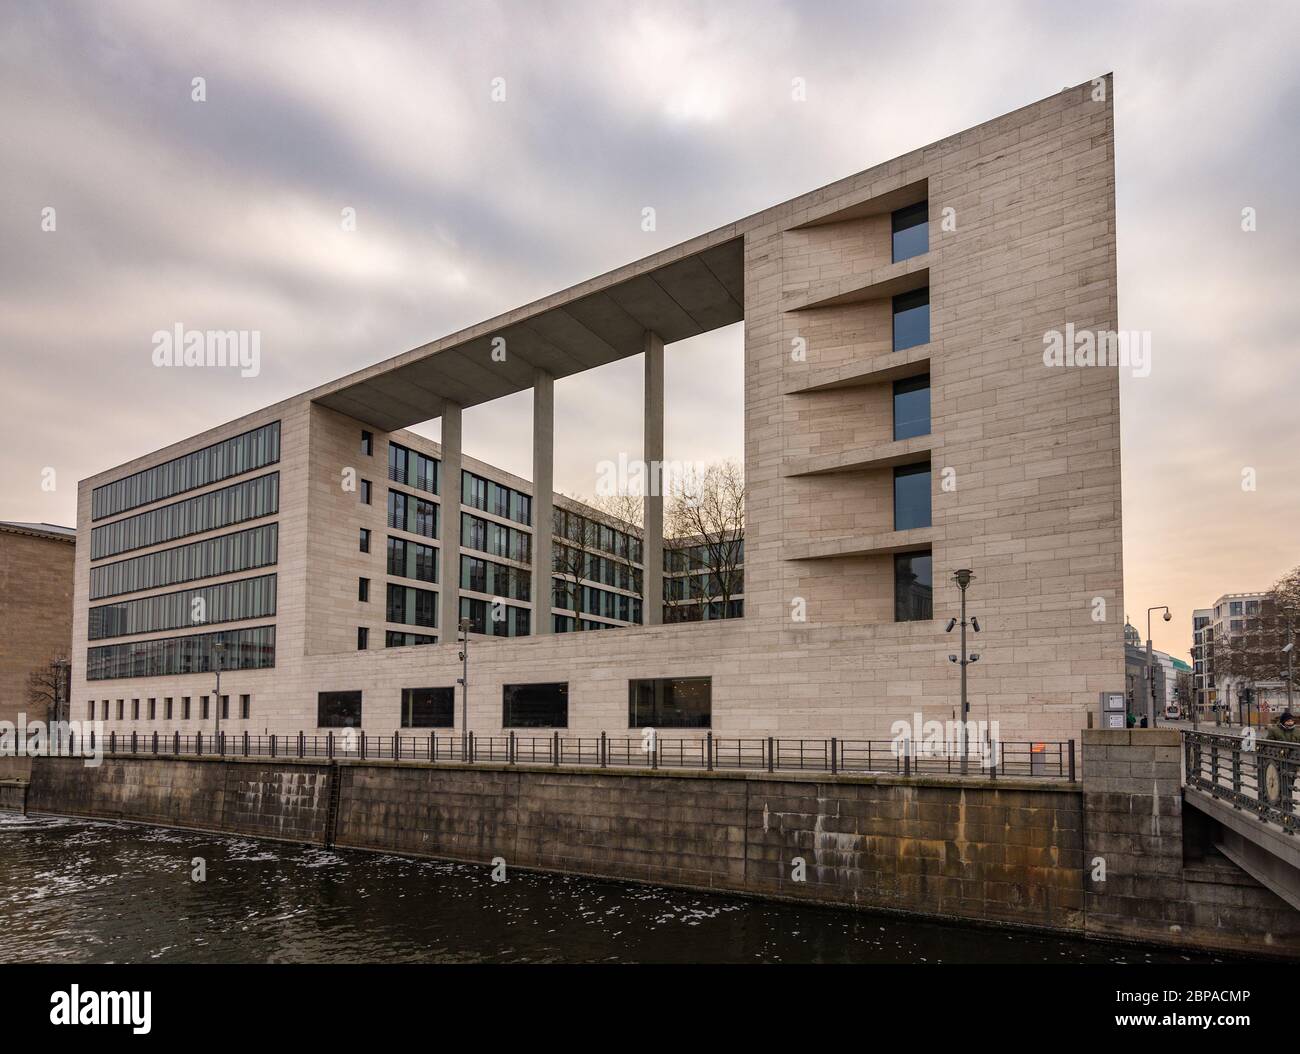 Berlin / Germany - February 12, 2017: Federal Foreign Office (Auswärtiges Amt), foreign ministry building of the Federal Republic of Germany in Berlin Stock Photo